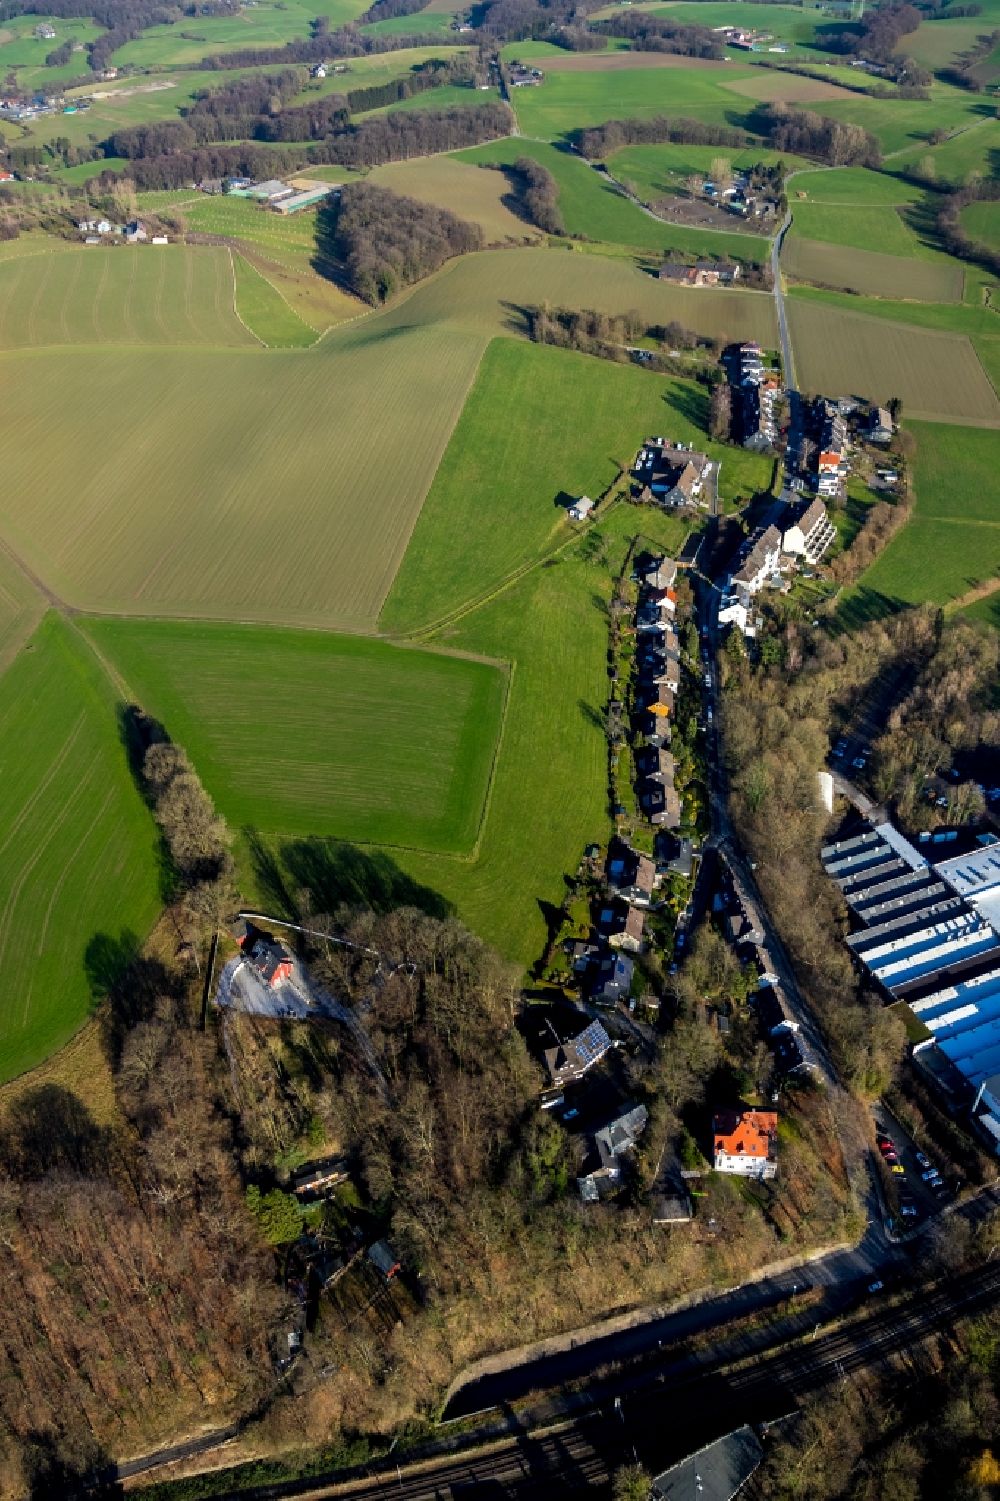 Velbert from the bird's eye view: Village view on the edge of agricultural fields and land along the Donnenberger Strasse in the district Donnenberg in Velbert in the state North Rhine-Westphalia, Germany